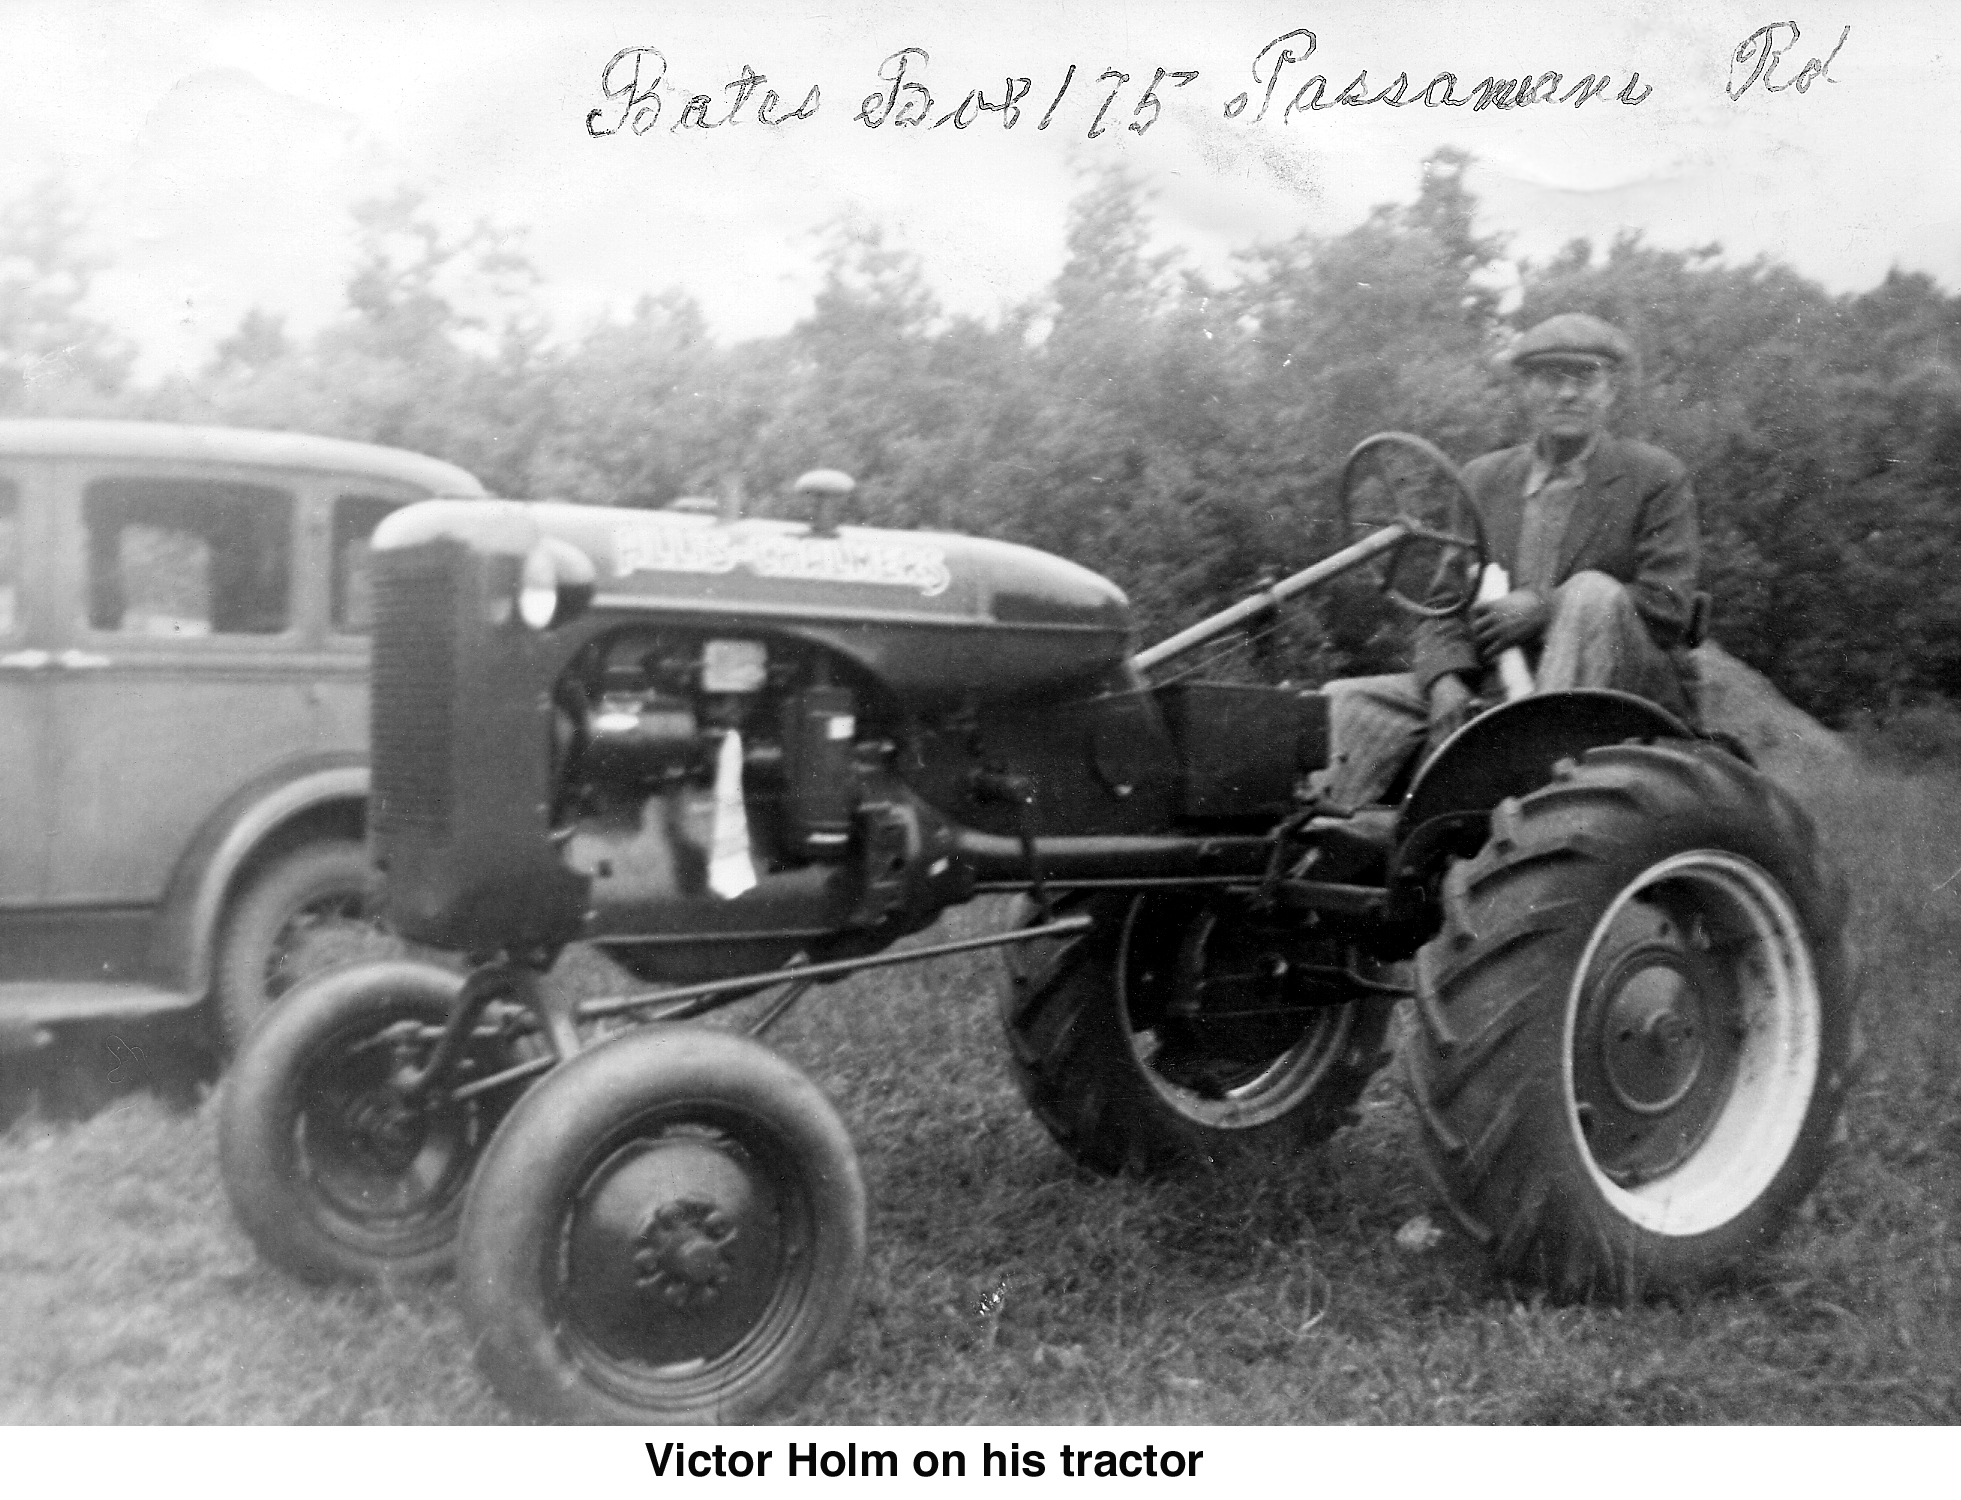 Victor Holm seated at the wheel of his tractor